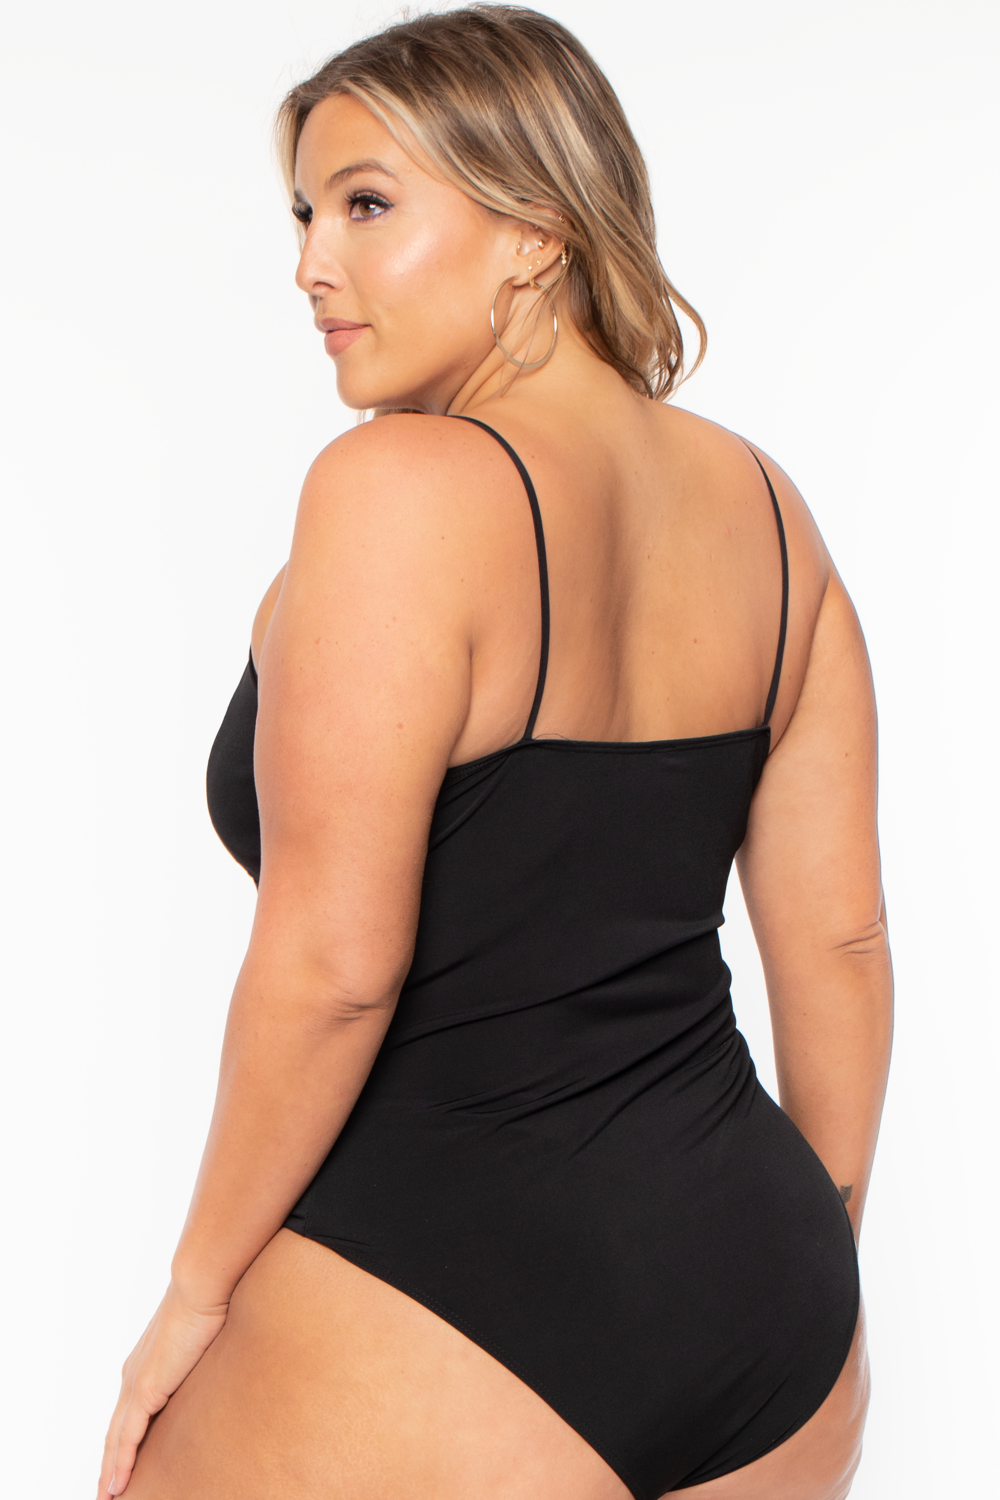 Black Strappy Bodysuits for Women - Up to 80% off